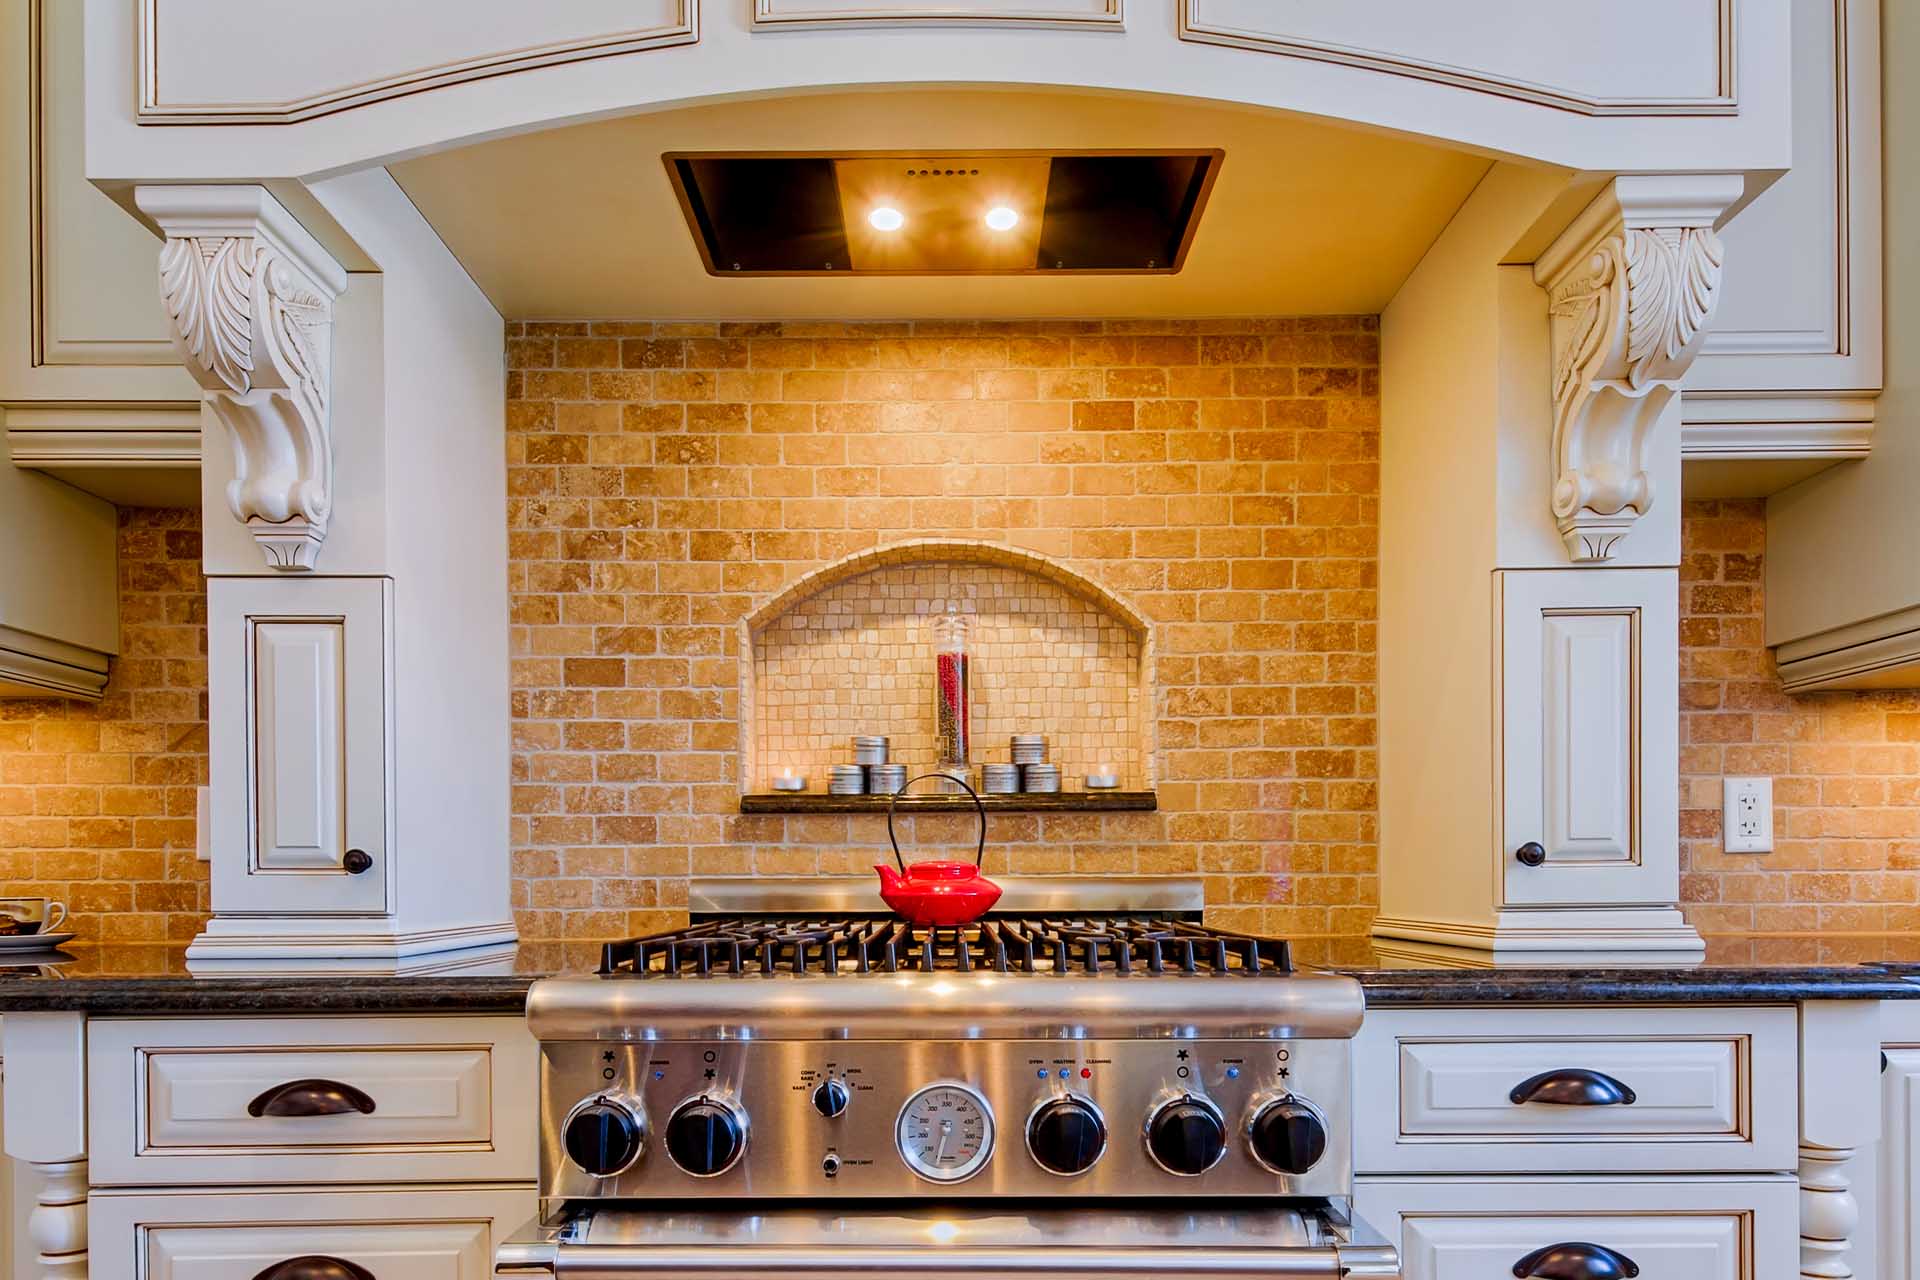 NorthSide Contractors Residential Remodeling 1920x1280_0014_gas-stove-in-luxury-kitchen